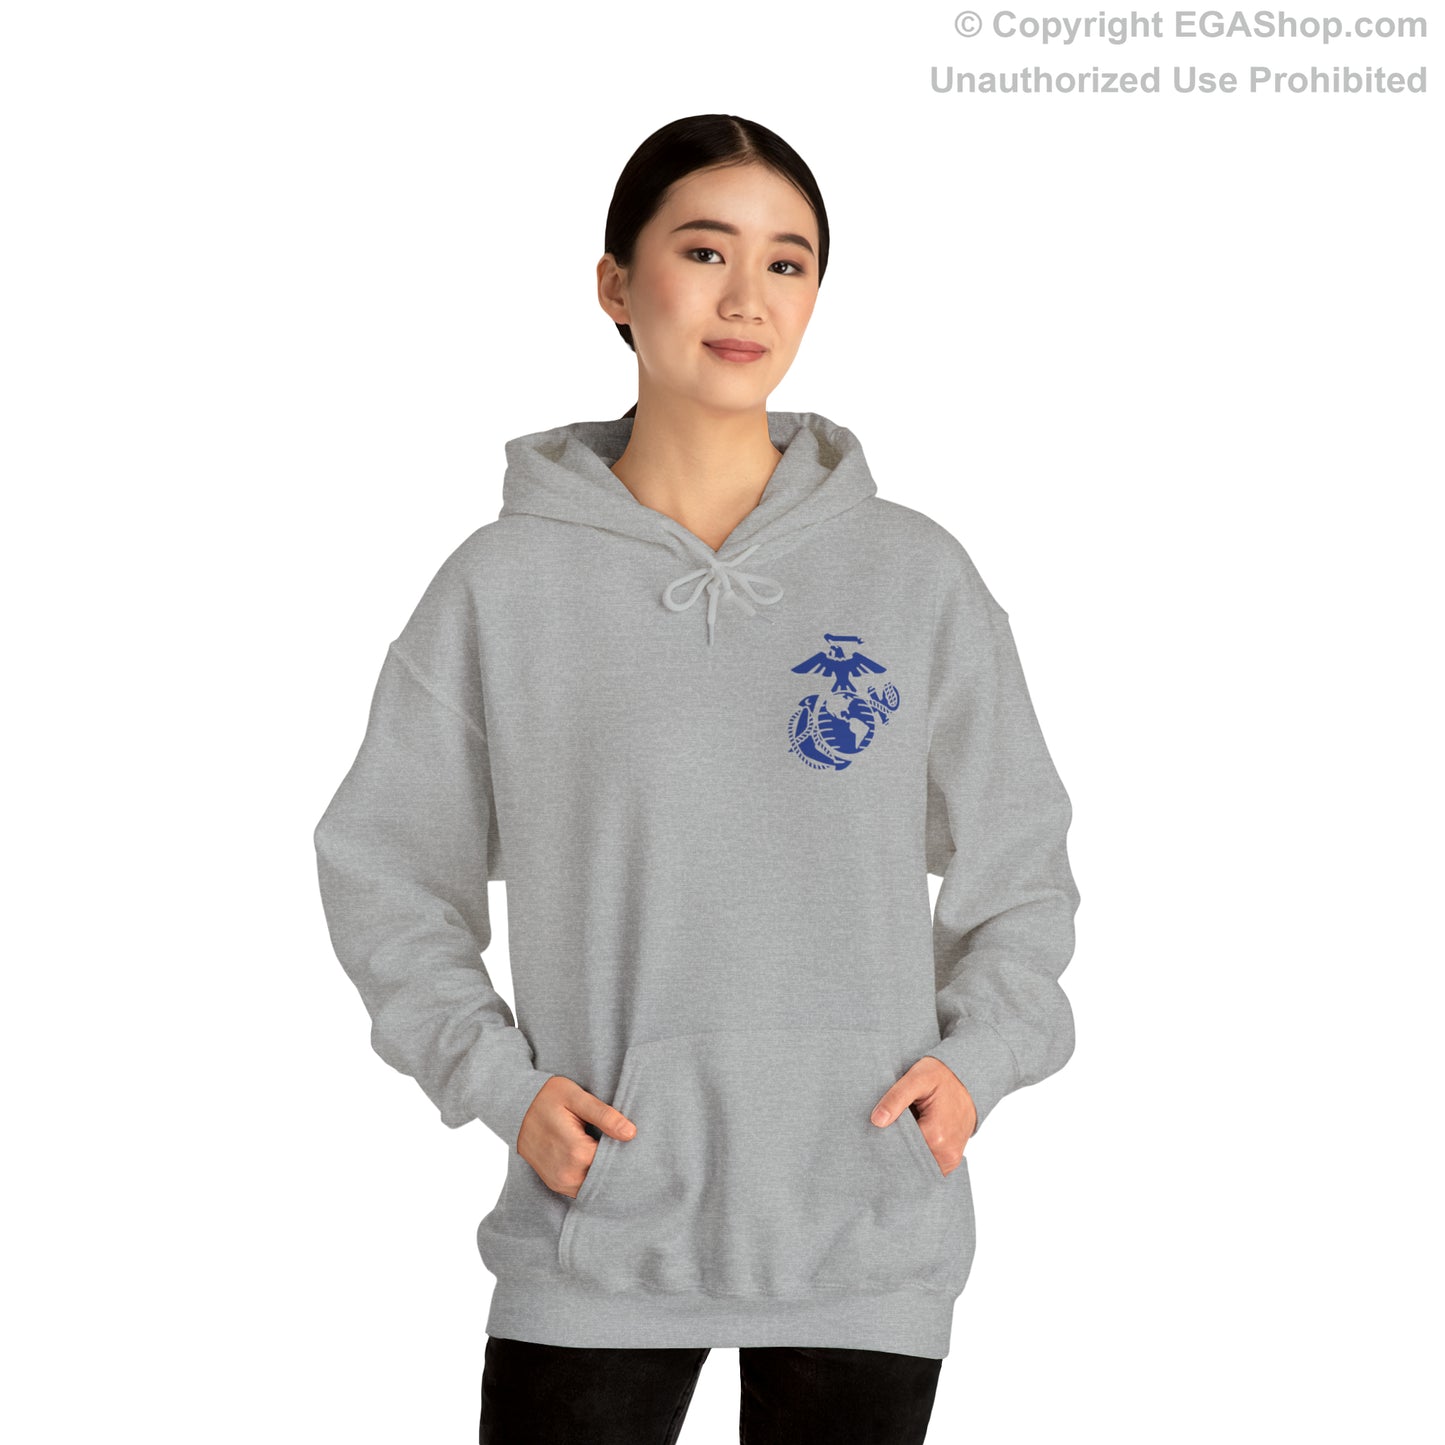 Hoodie: India Co. MCRD San Diego (3rd Battalion Crest on BACK)